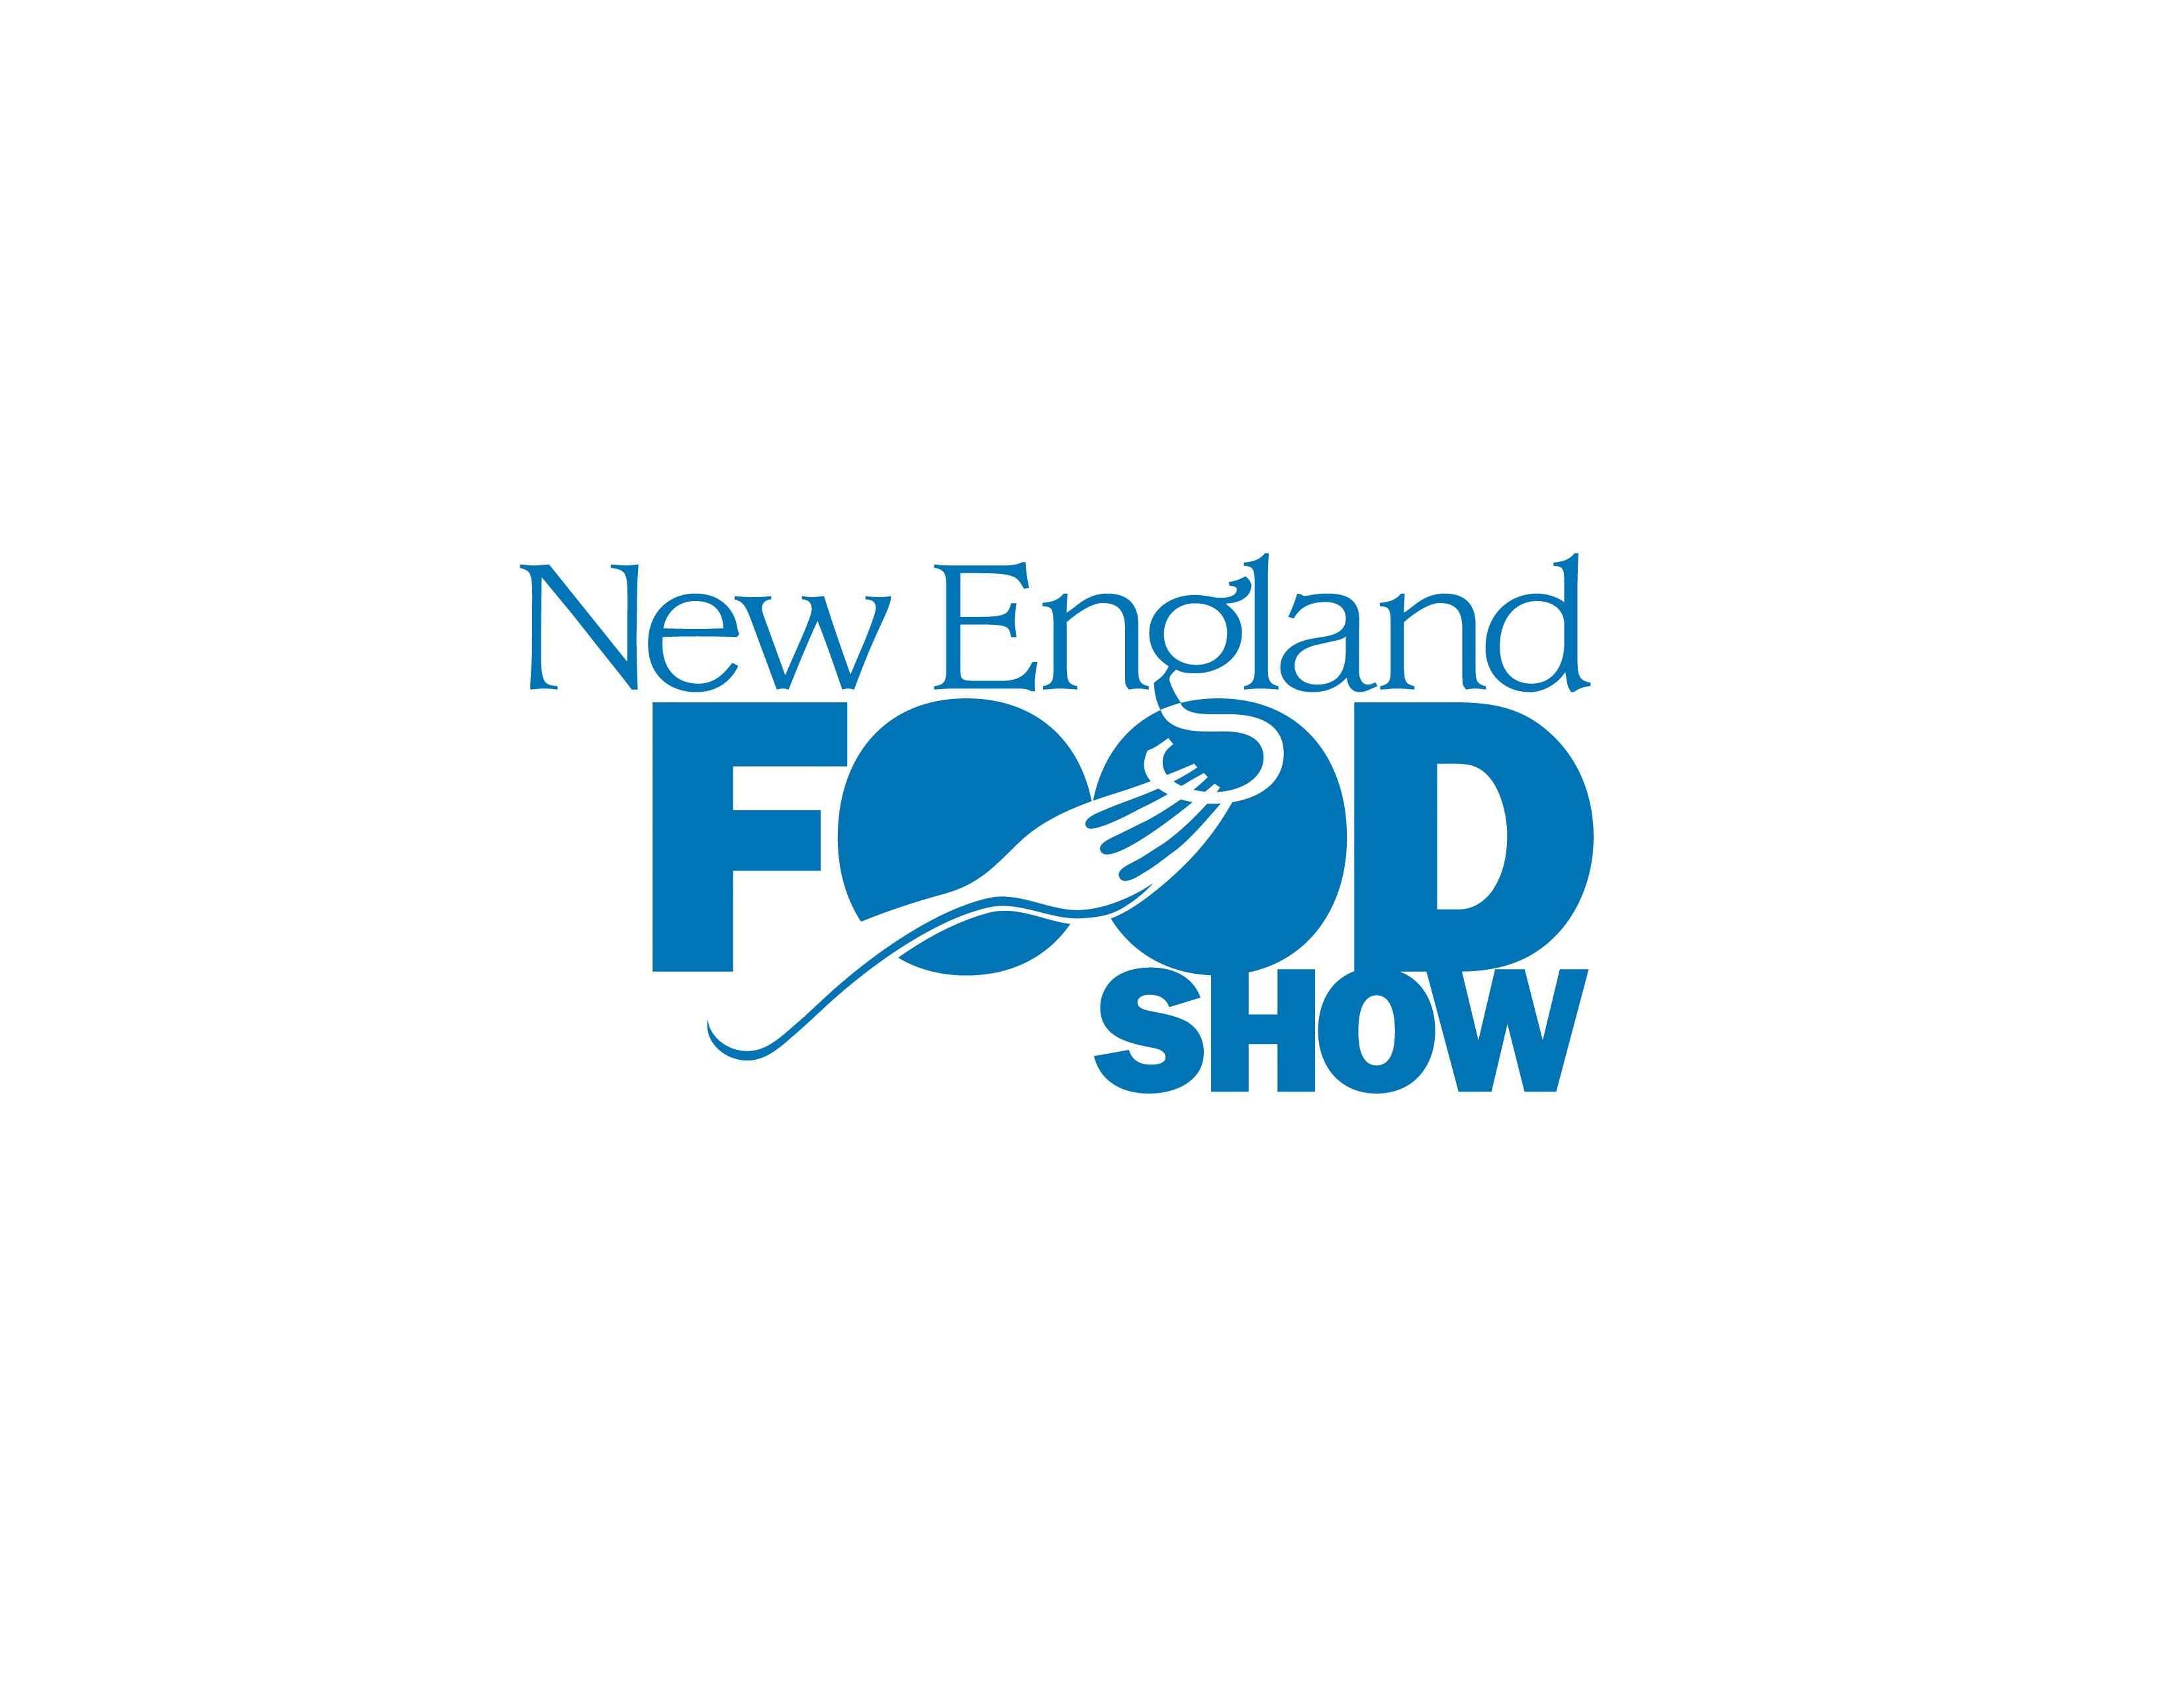 New England Food Show Opens This Sunday at the Boston Convention